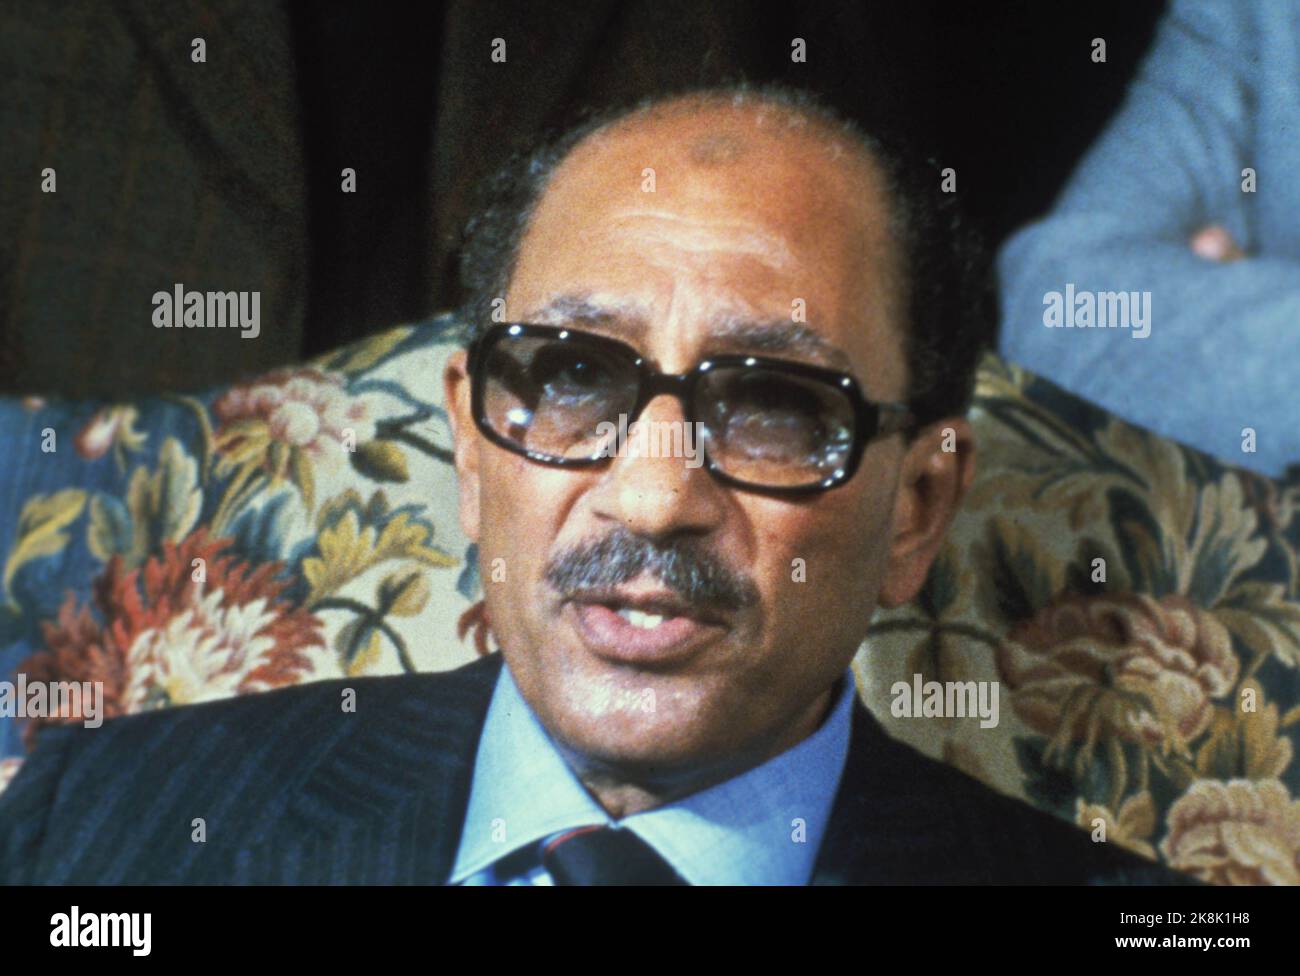 The Peace Prize: The Nobel Peace Prize for 1978 divided between Mohamed Anwar al-Sadat (pictured) and Menachem Begin. Sadat was not present at the awards, here in an archive photo from 1979. Photo NTB / Archive Stock Photo